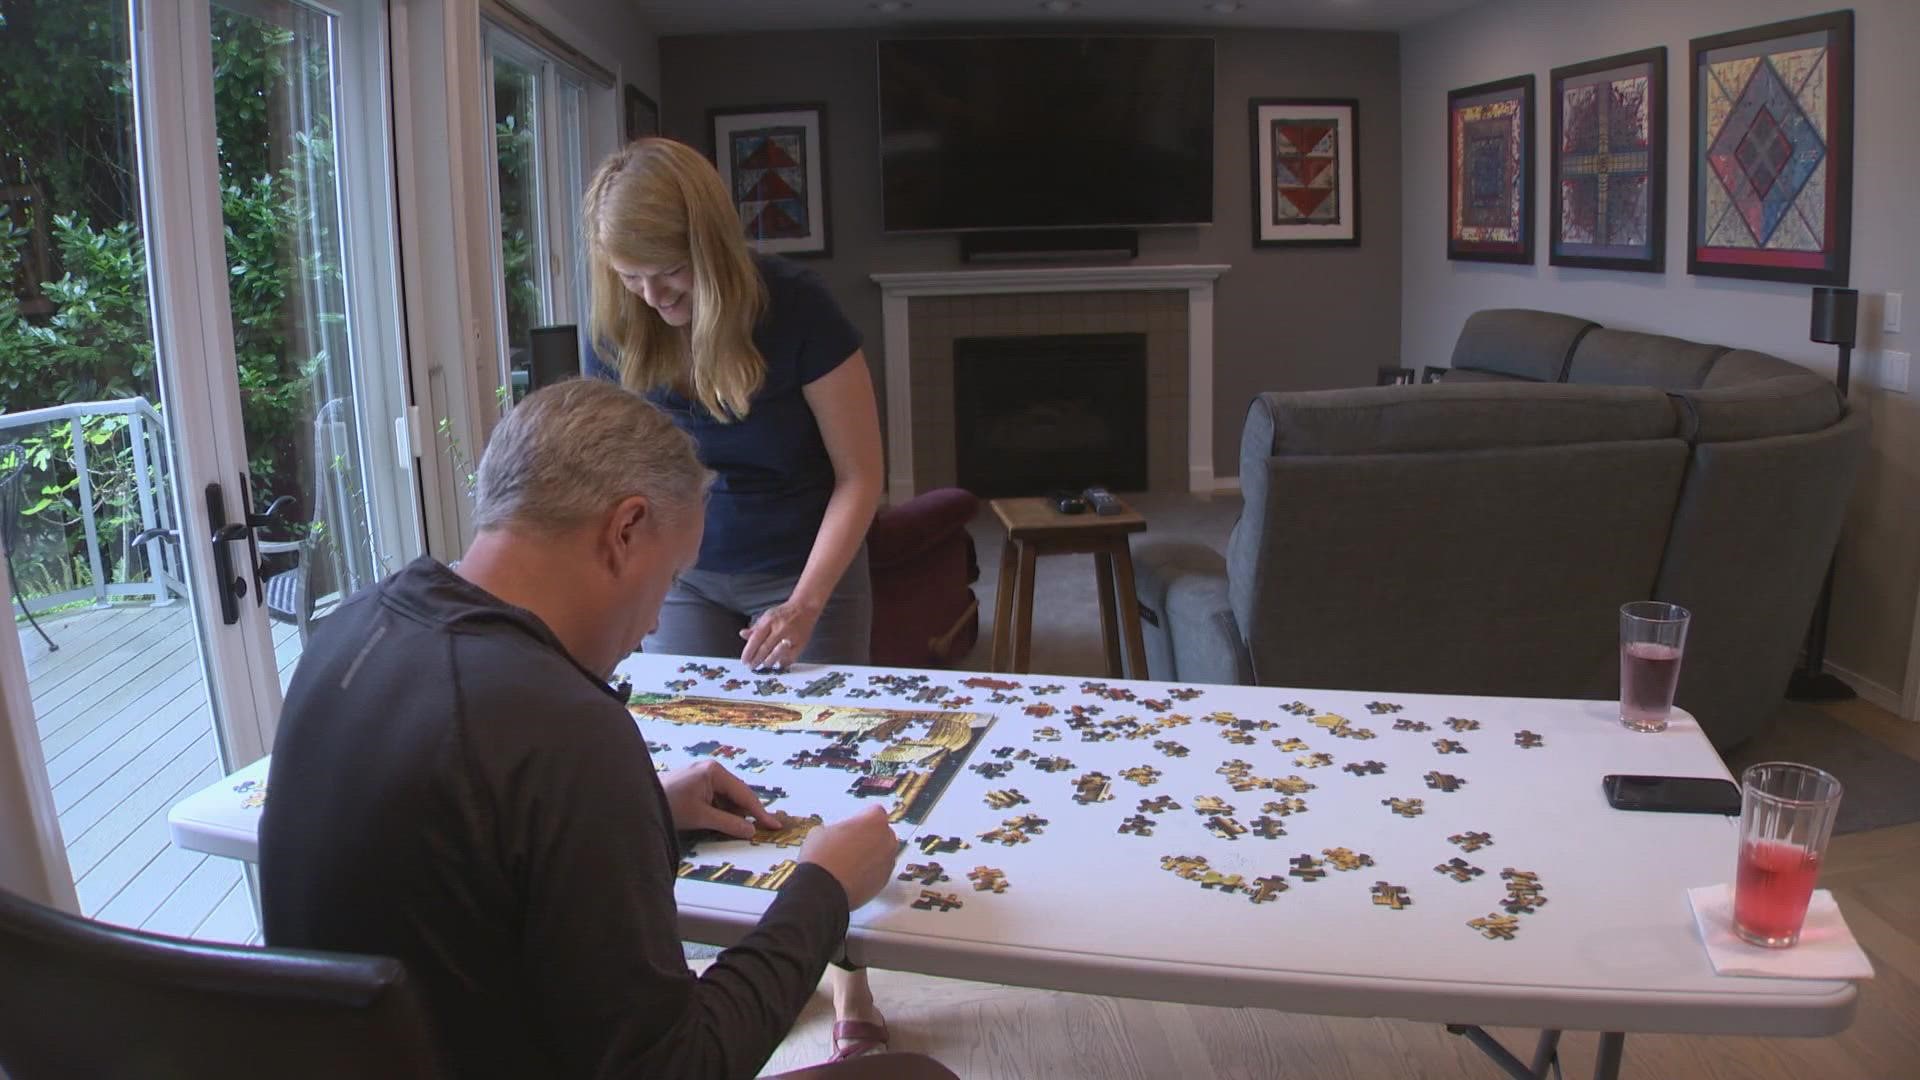 Jigsaw puzzlers Gretchen and Jeff Klein ranked 90th in world